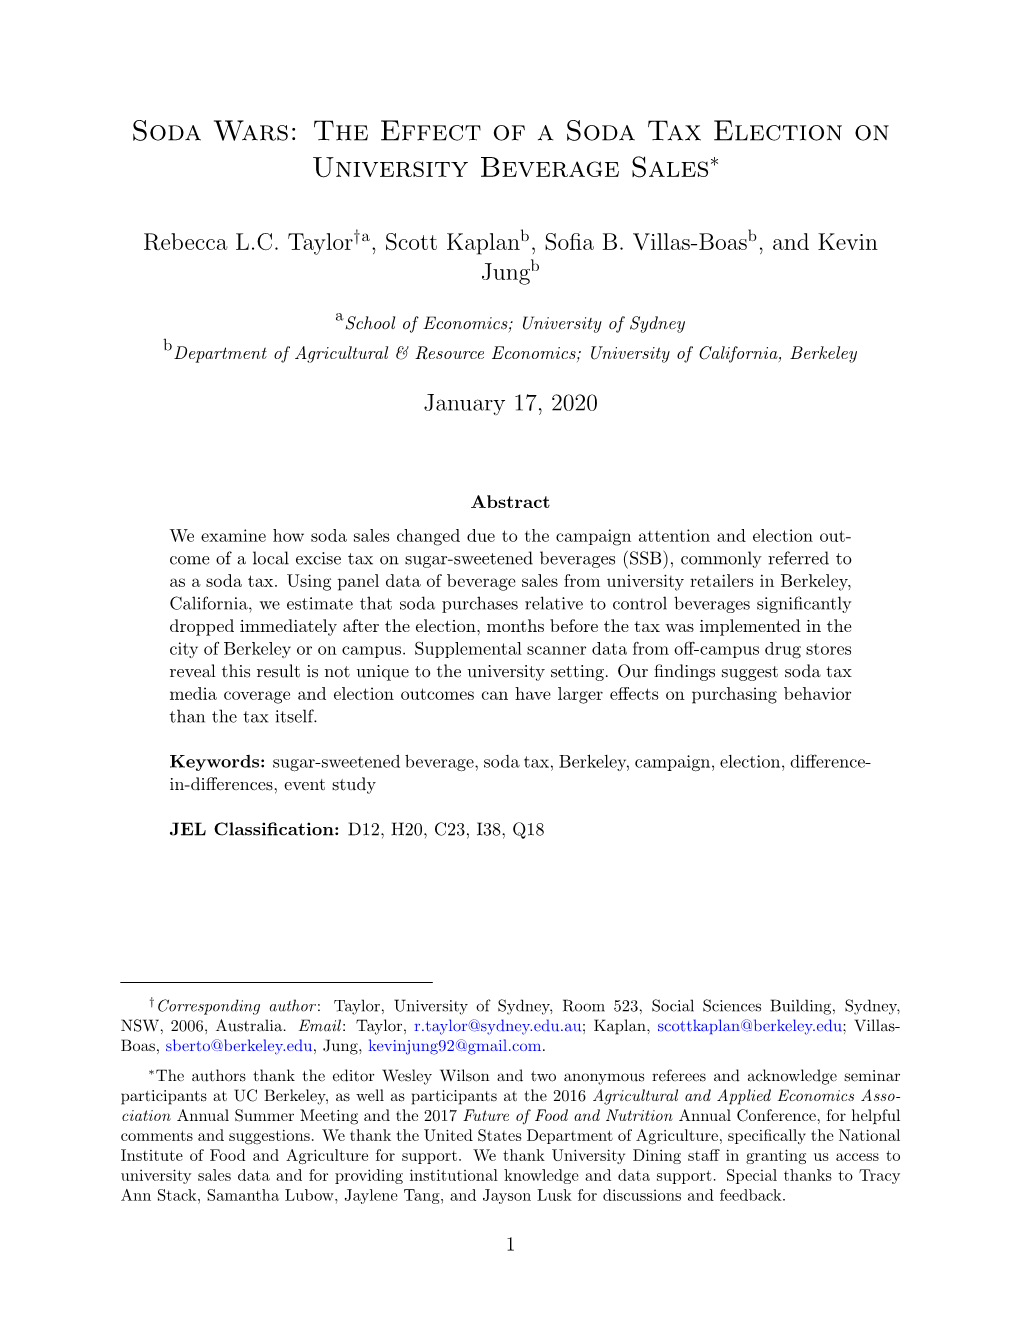 The Effect of a Soda Tax Election on University Beverage Sales∗